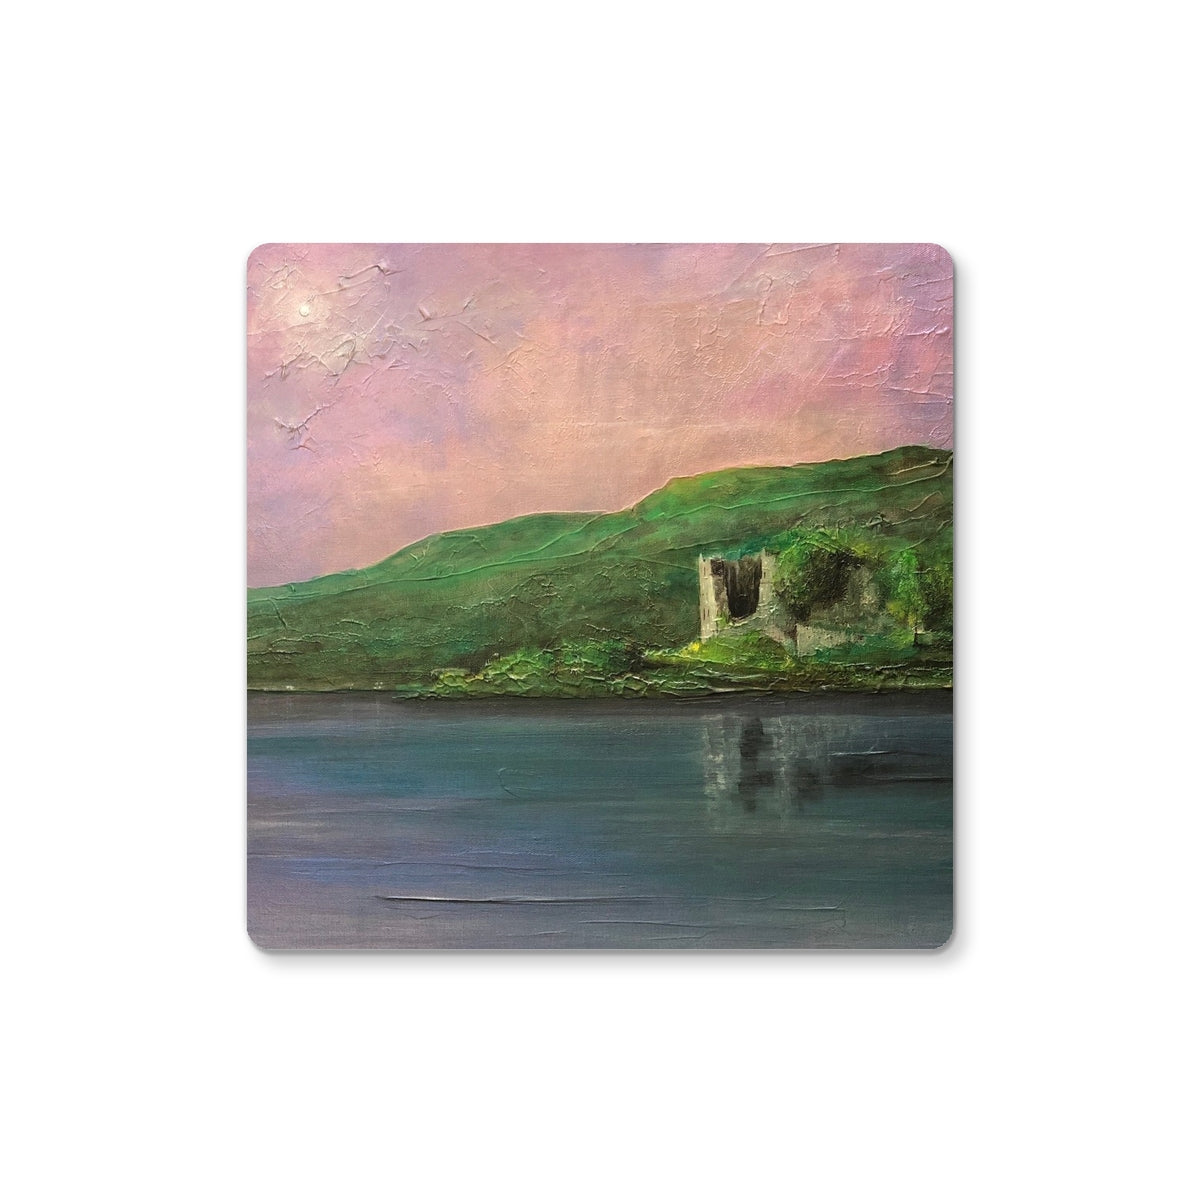 Old Castle Lachlan Art Gifts Coaster-Homeware-Prodigi-2 Coasters-Paintings, Prints, Homeware, Art Gifts From Scotland By Scottish Artist Kevin Hunter